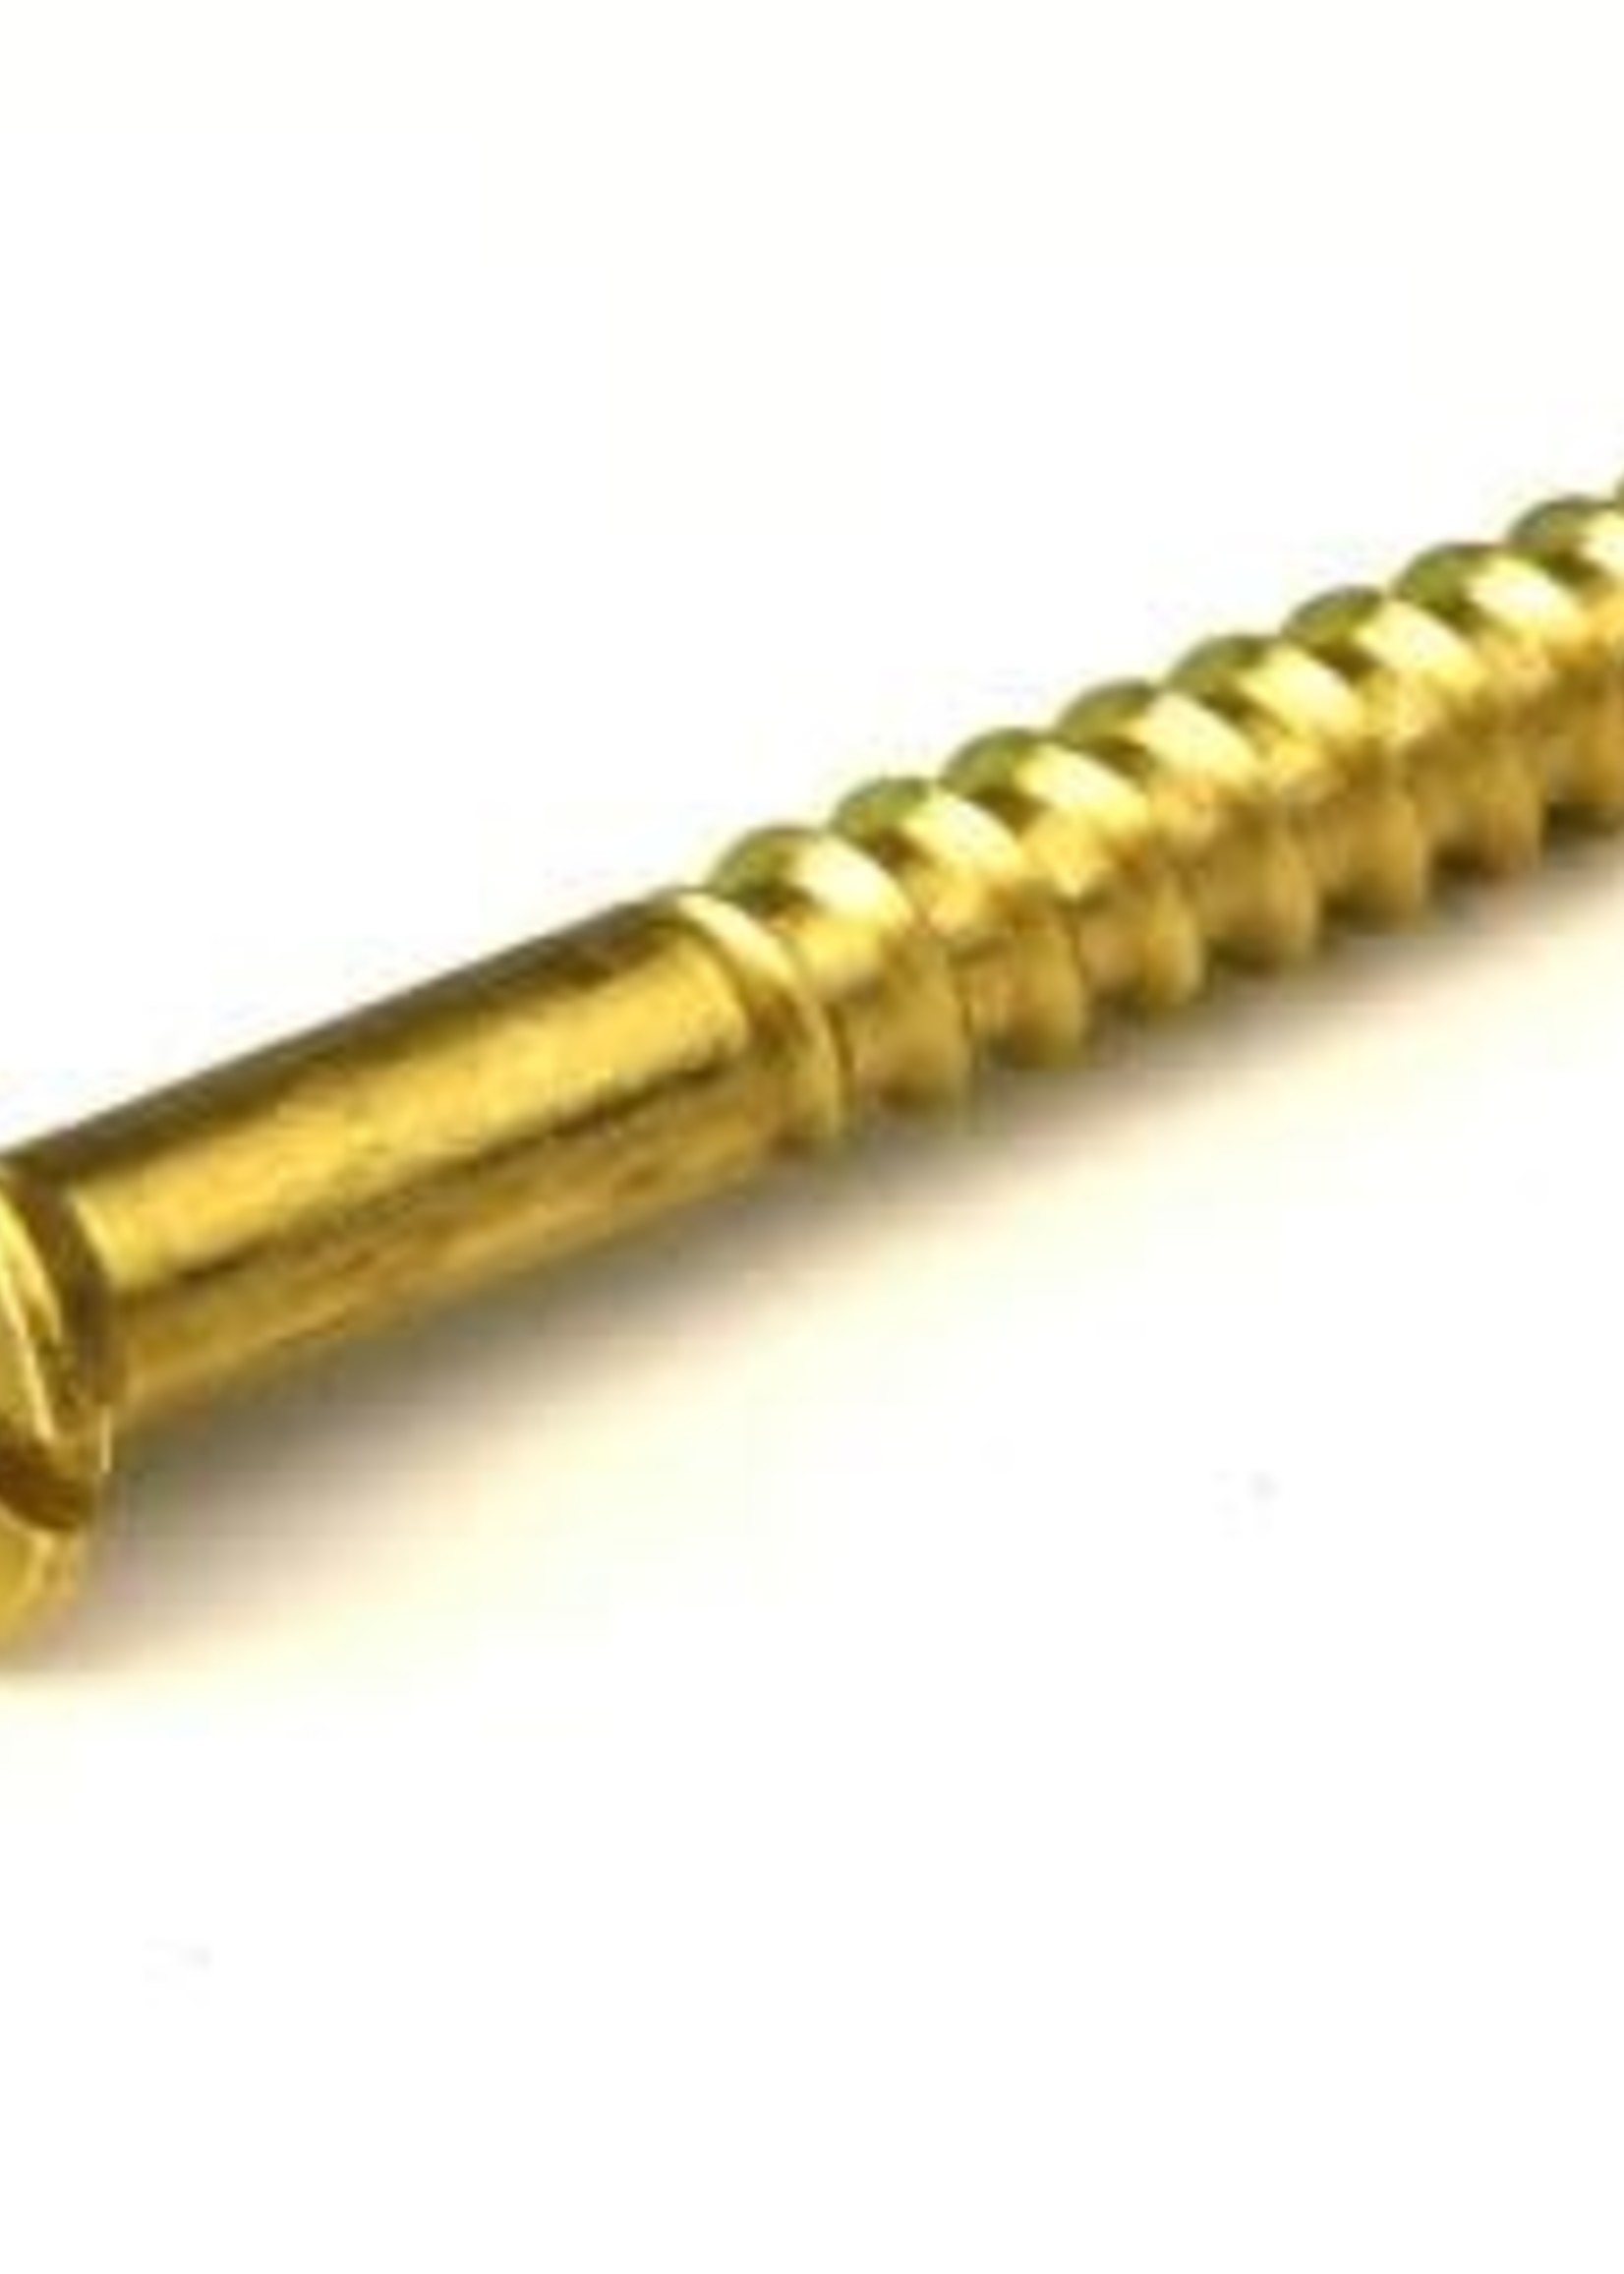 Securit Screws Brass CSK Slotted 6 1 1/2"